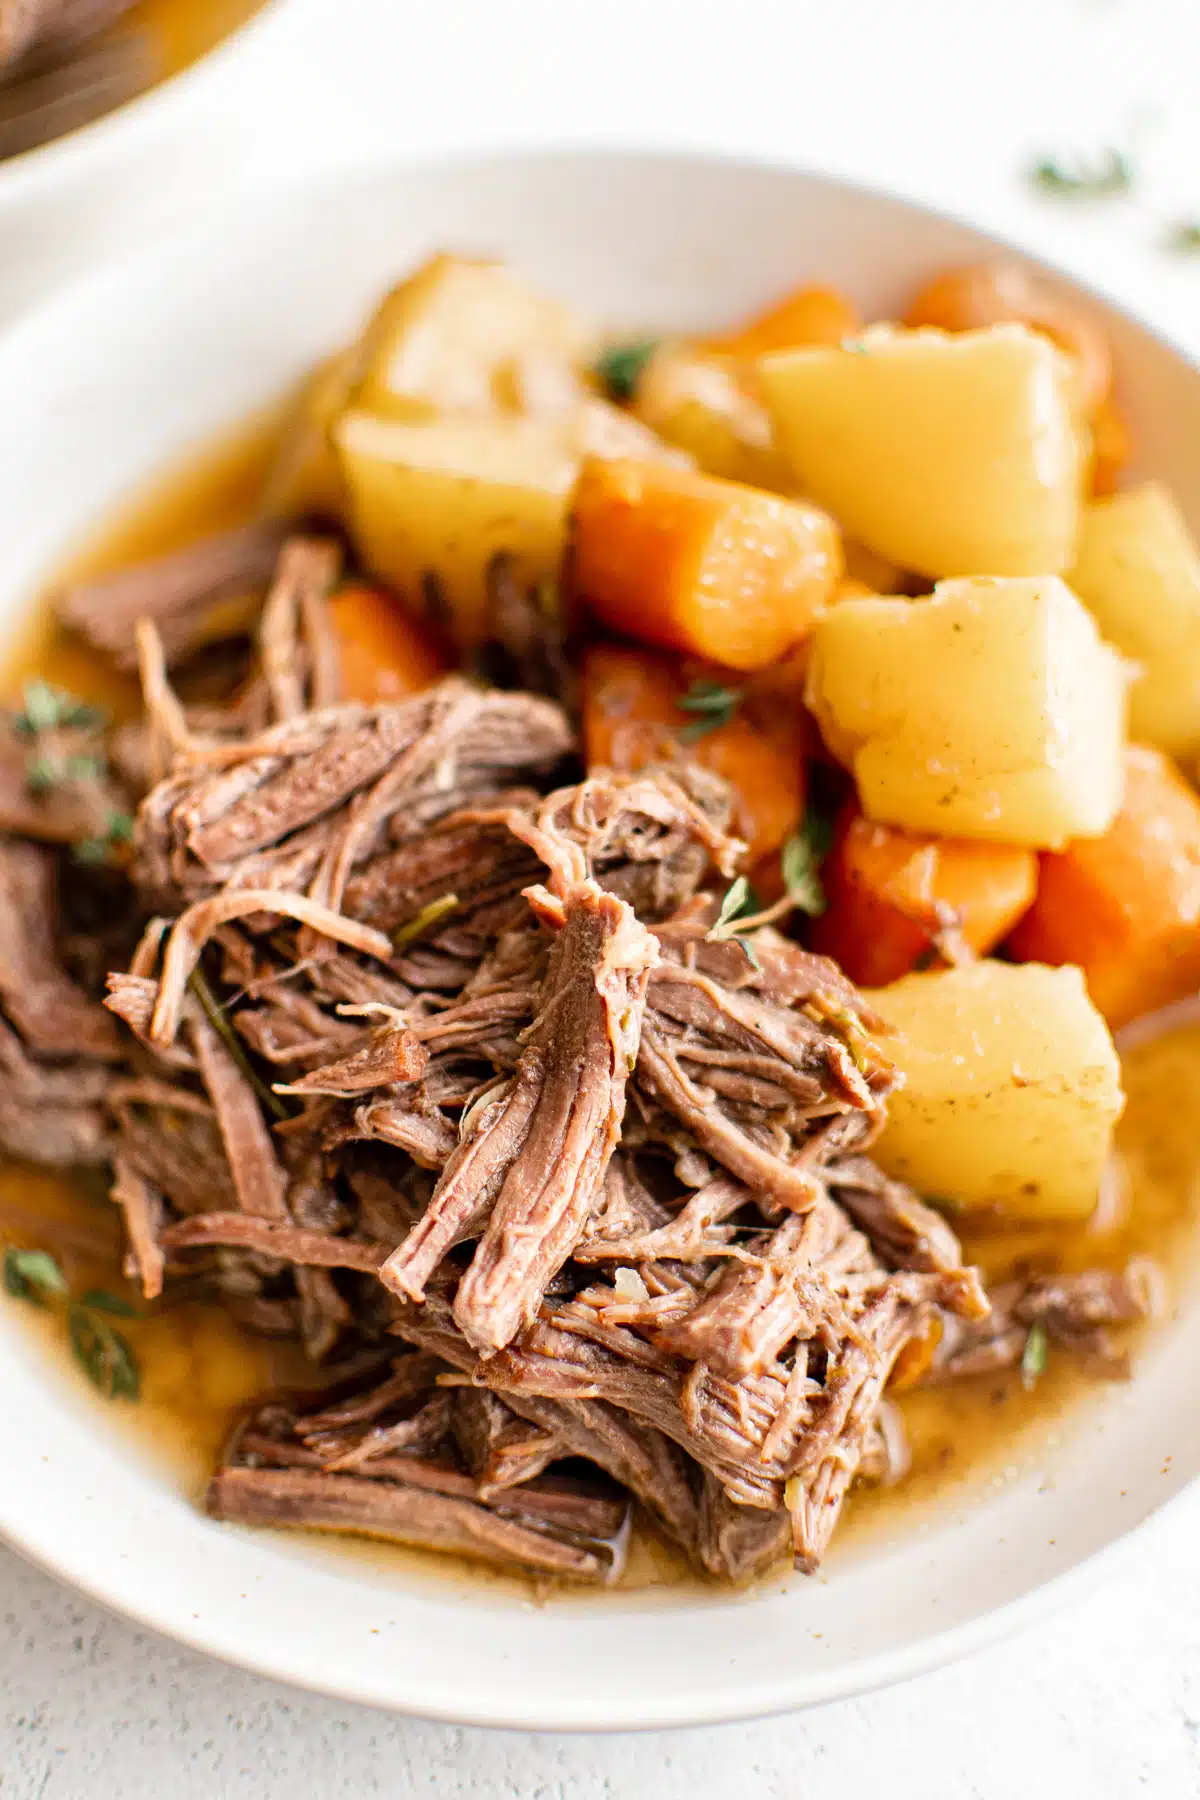 White dinner plate with a serving of shredded beef pot roast and a side of stewed carrots, onions, and potatoes.